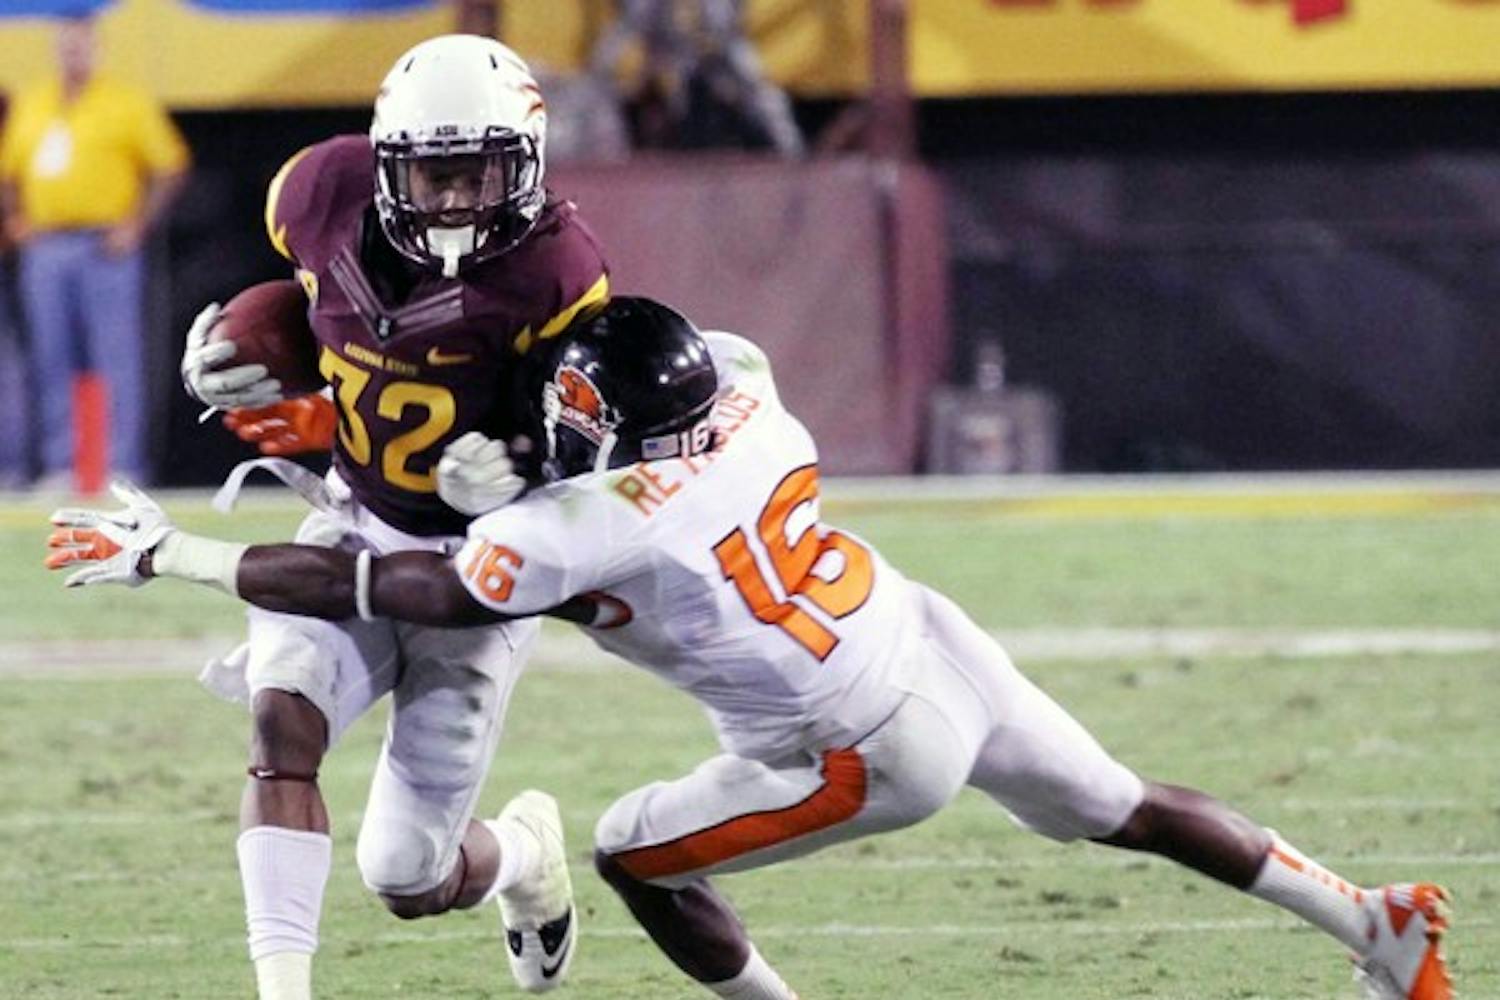 HONOR-WORTHY: ASU junior wide receiver Jamal Miles tries to break a tackle by Oregon State sophomore corner back Rashaad Reynolds during the Sun Devils’ victory on Saturday. Miles was named Pac-12 Player of the Week for his performance against the Beavers. (Photo by Lisa Bartoli)